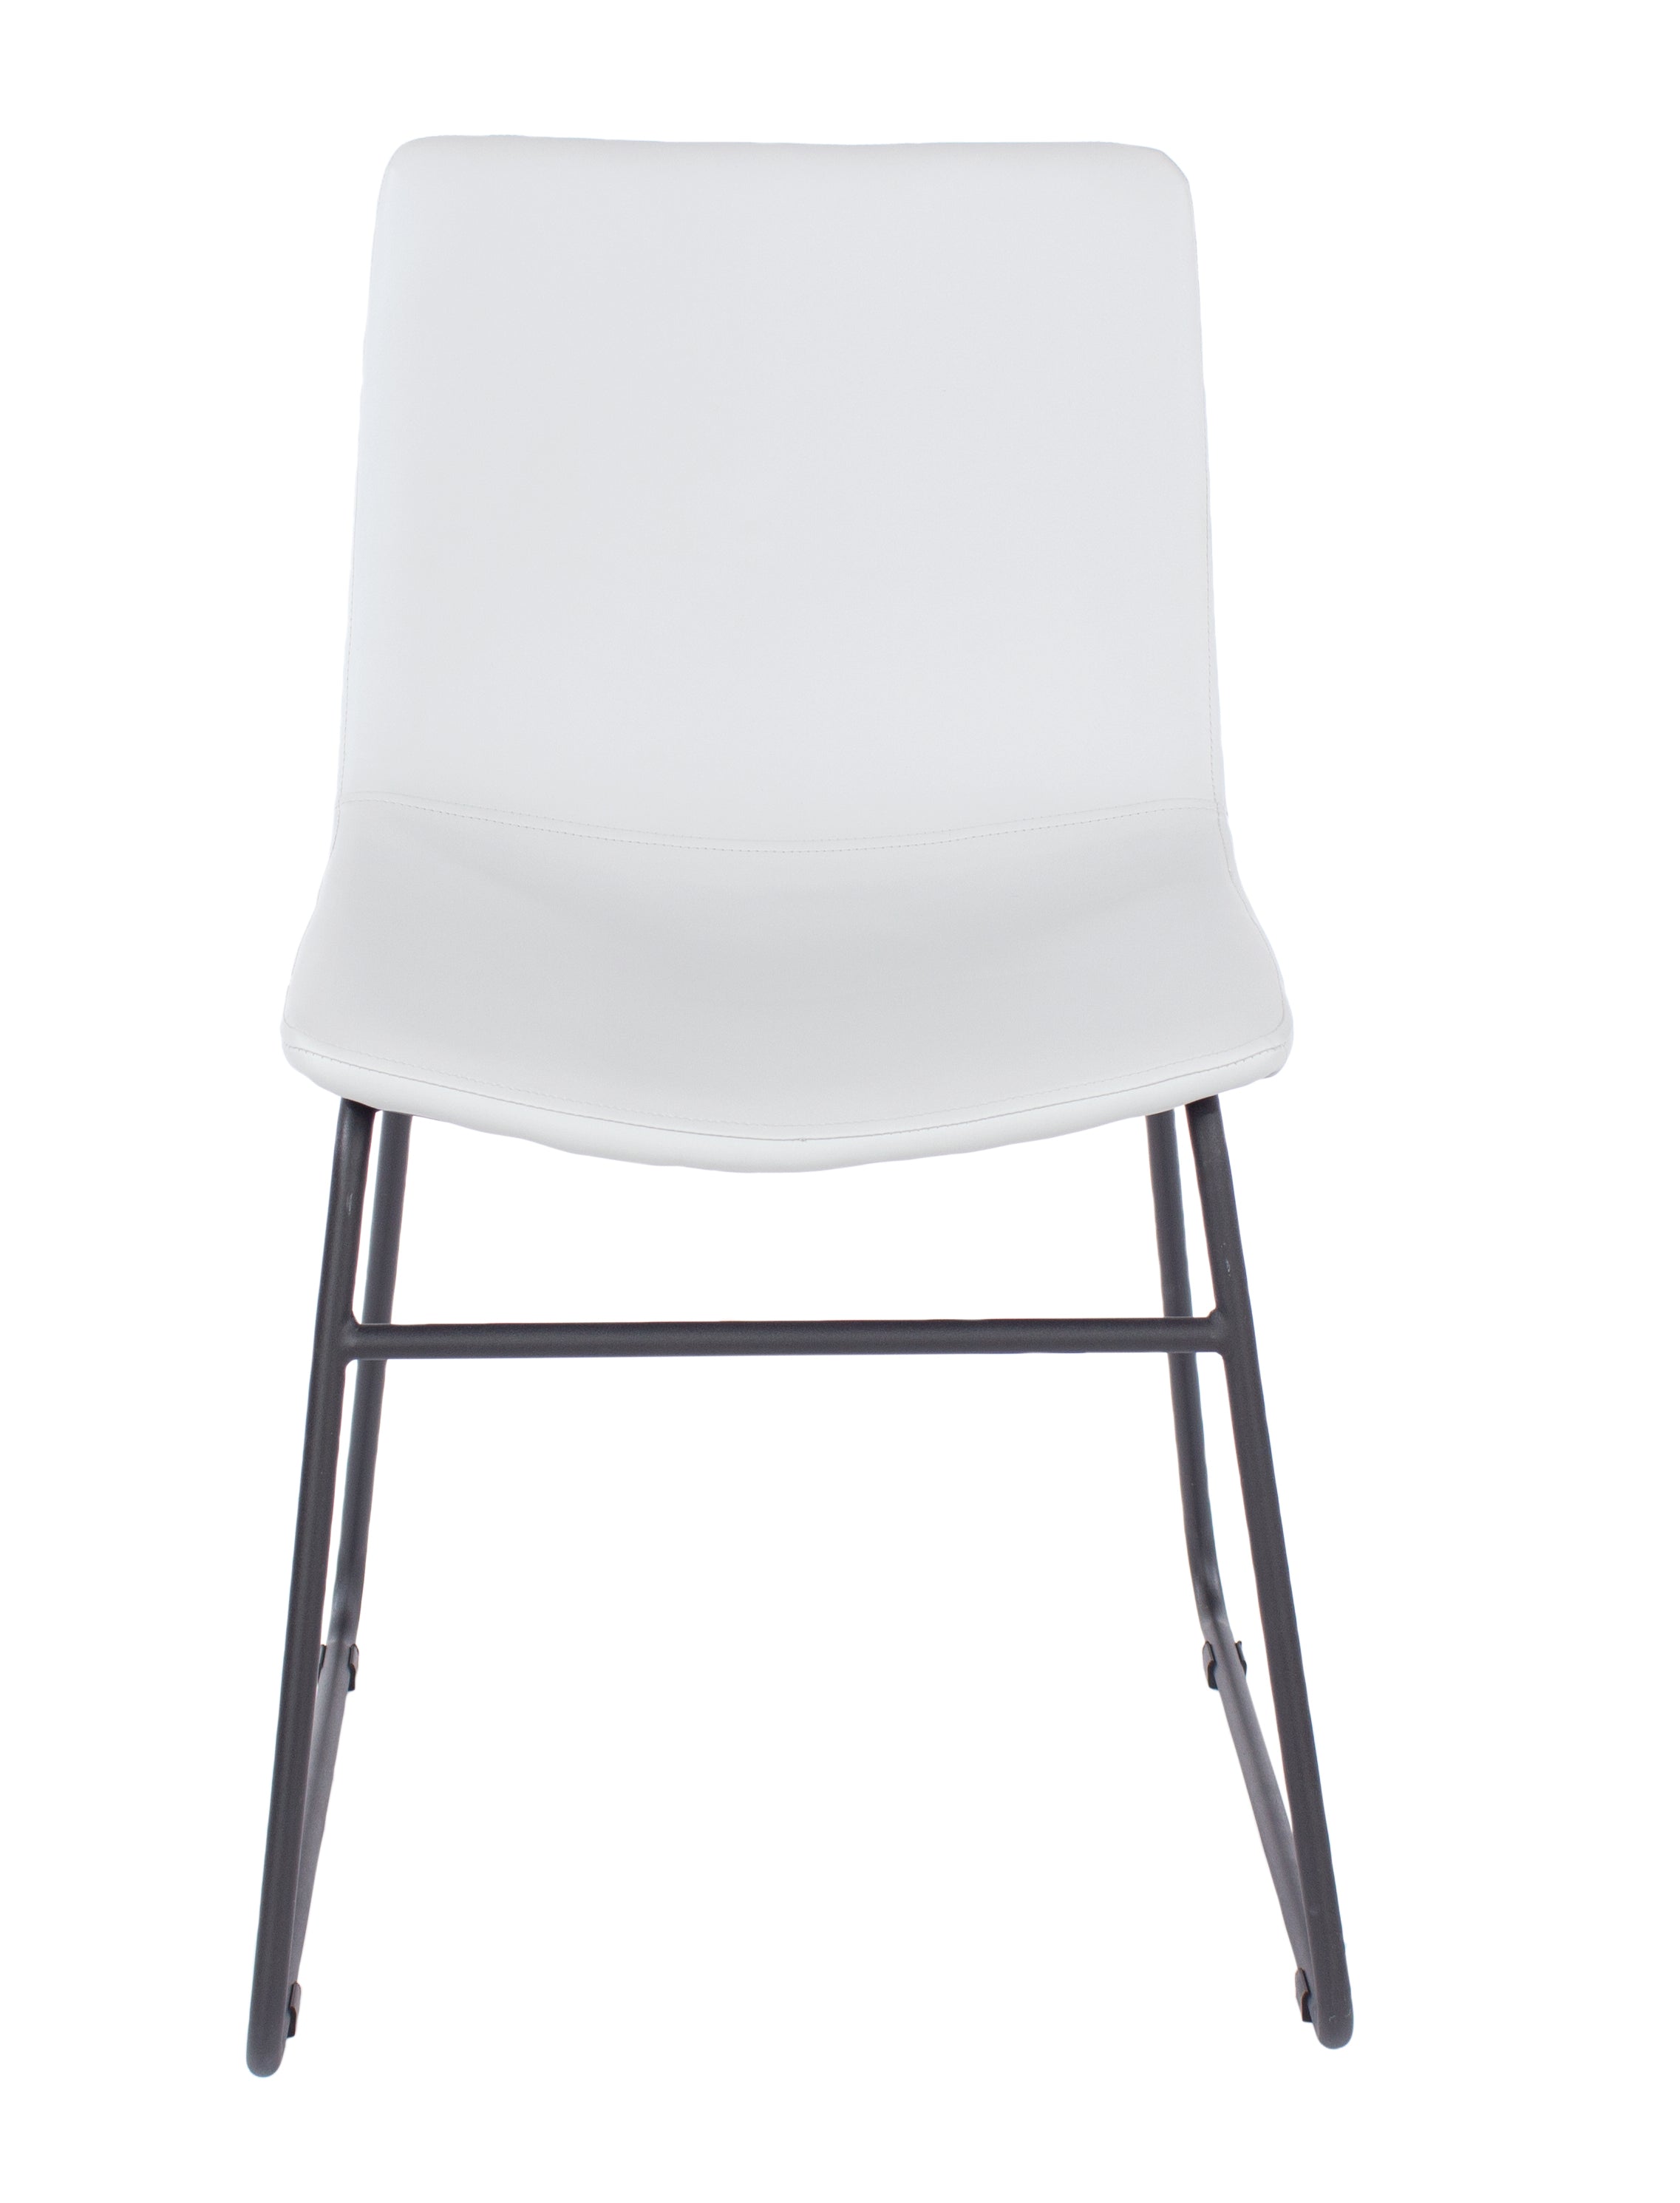 Grey Pu Upholstered Dining Chairs With Black Metal Legs (Pair)